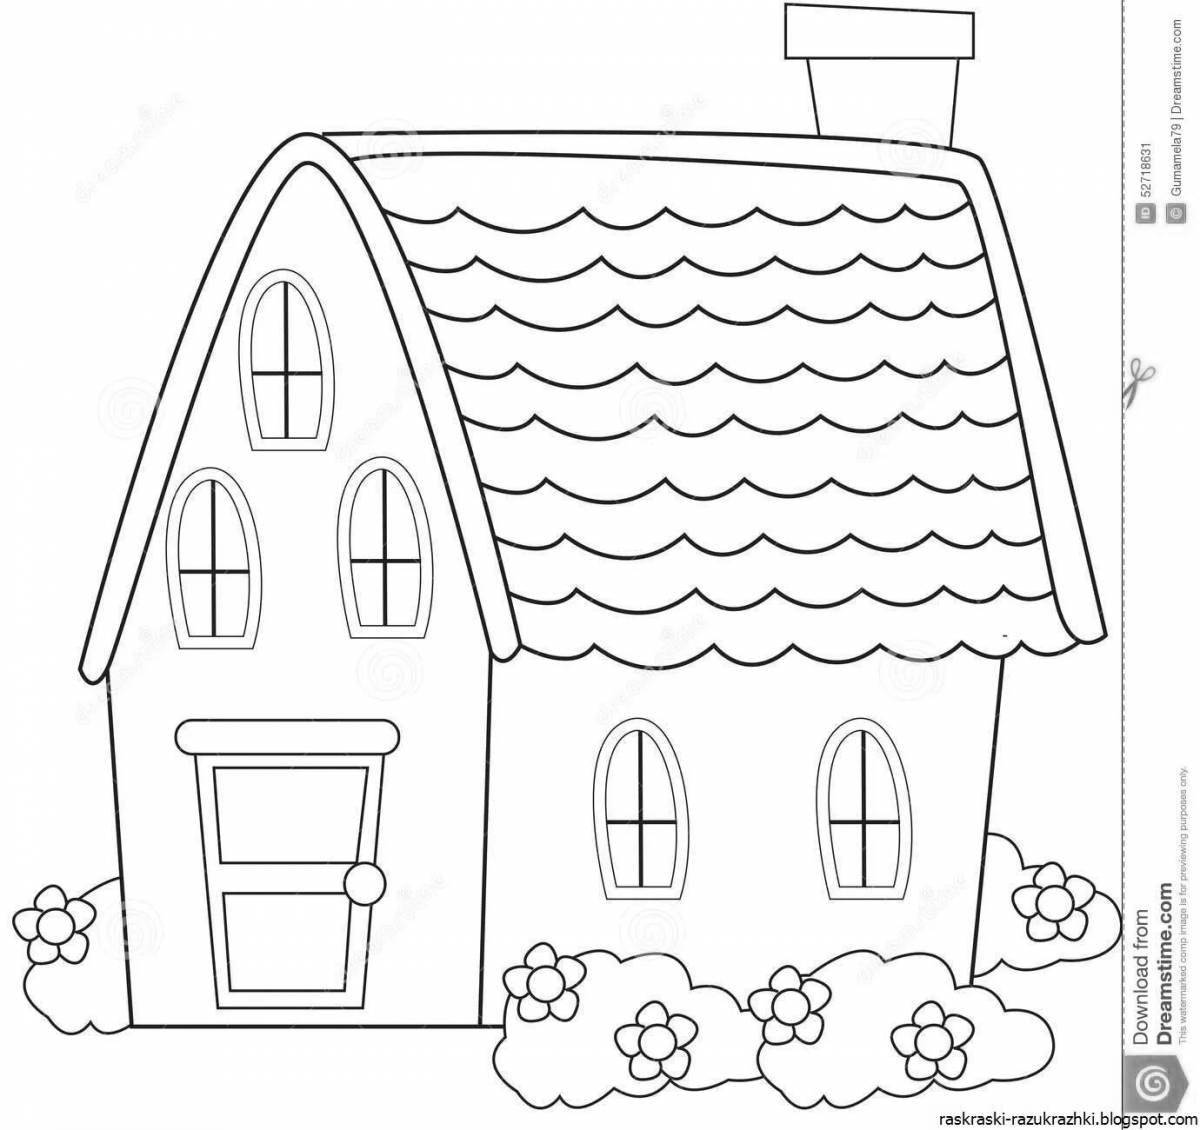 Coloring book funny house for children 4-5 years old